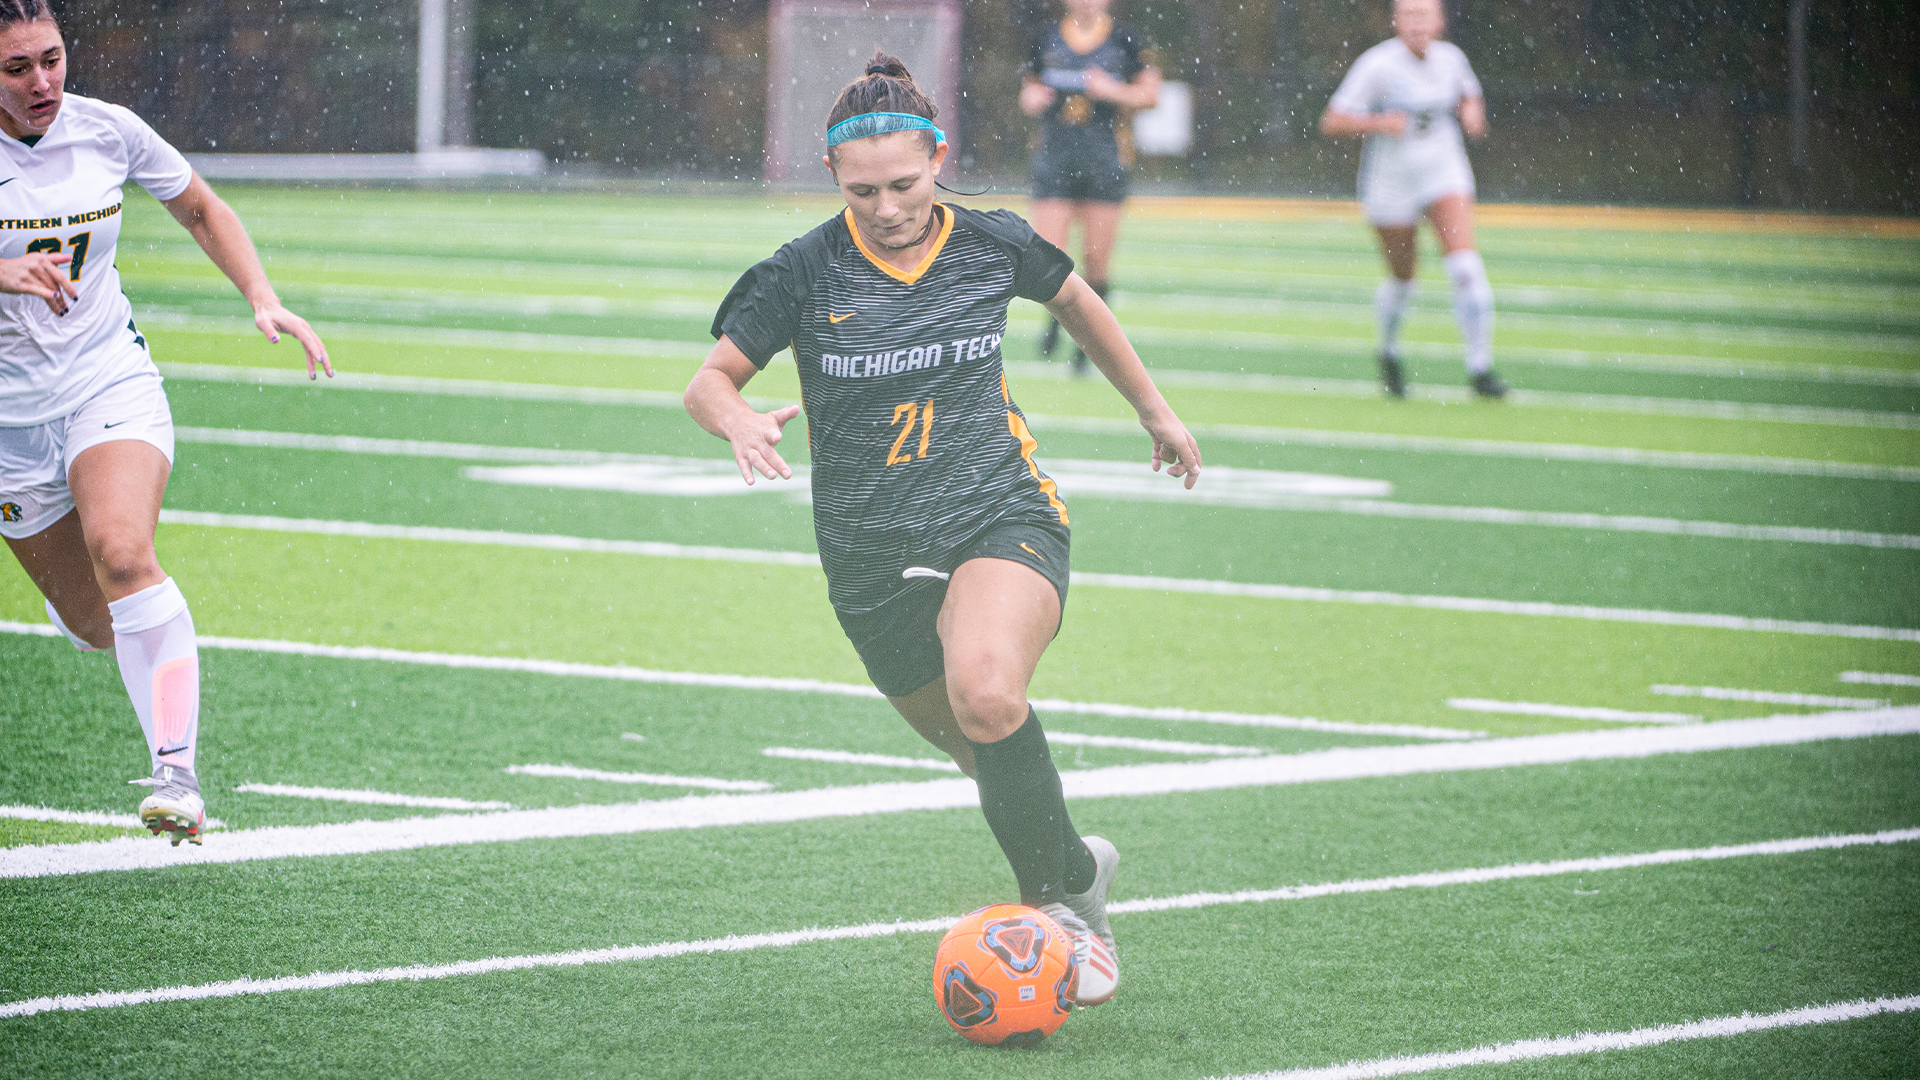 PREVIEW: Soccer wraps up regular season at PNW and NMU